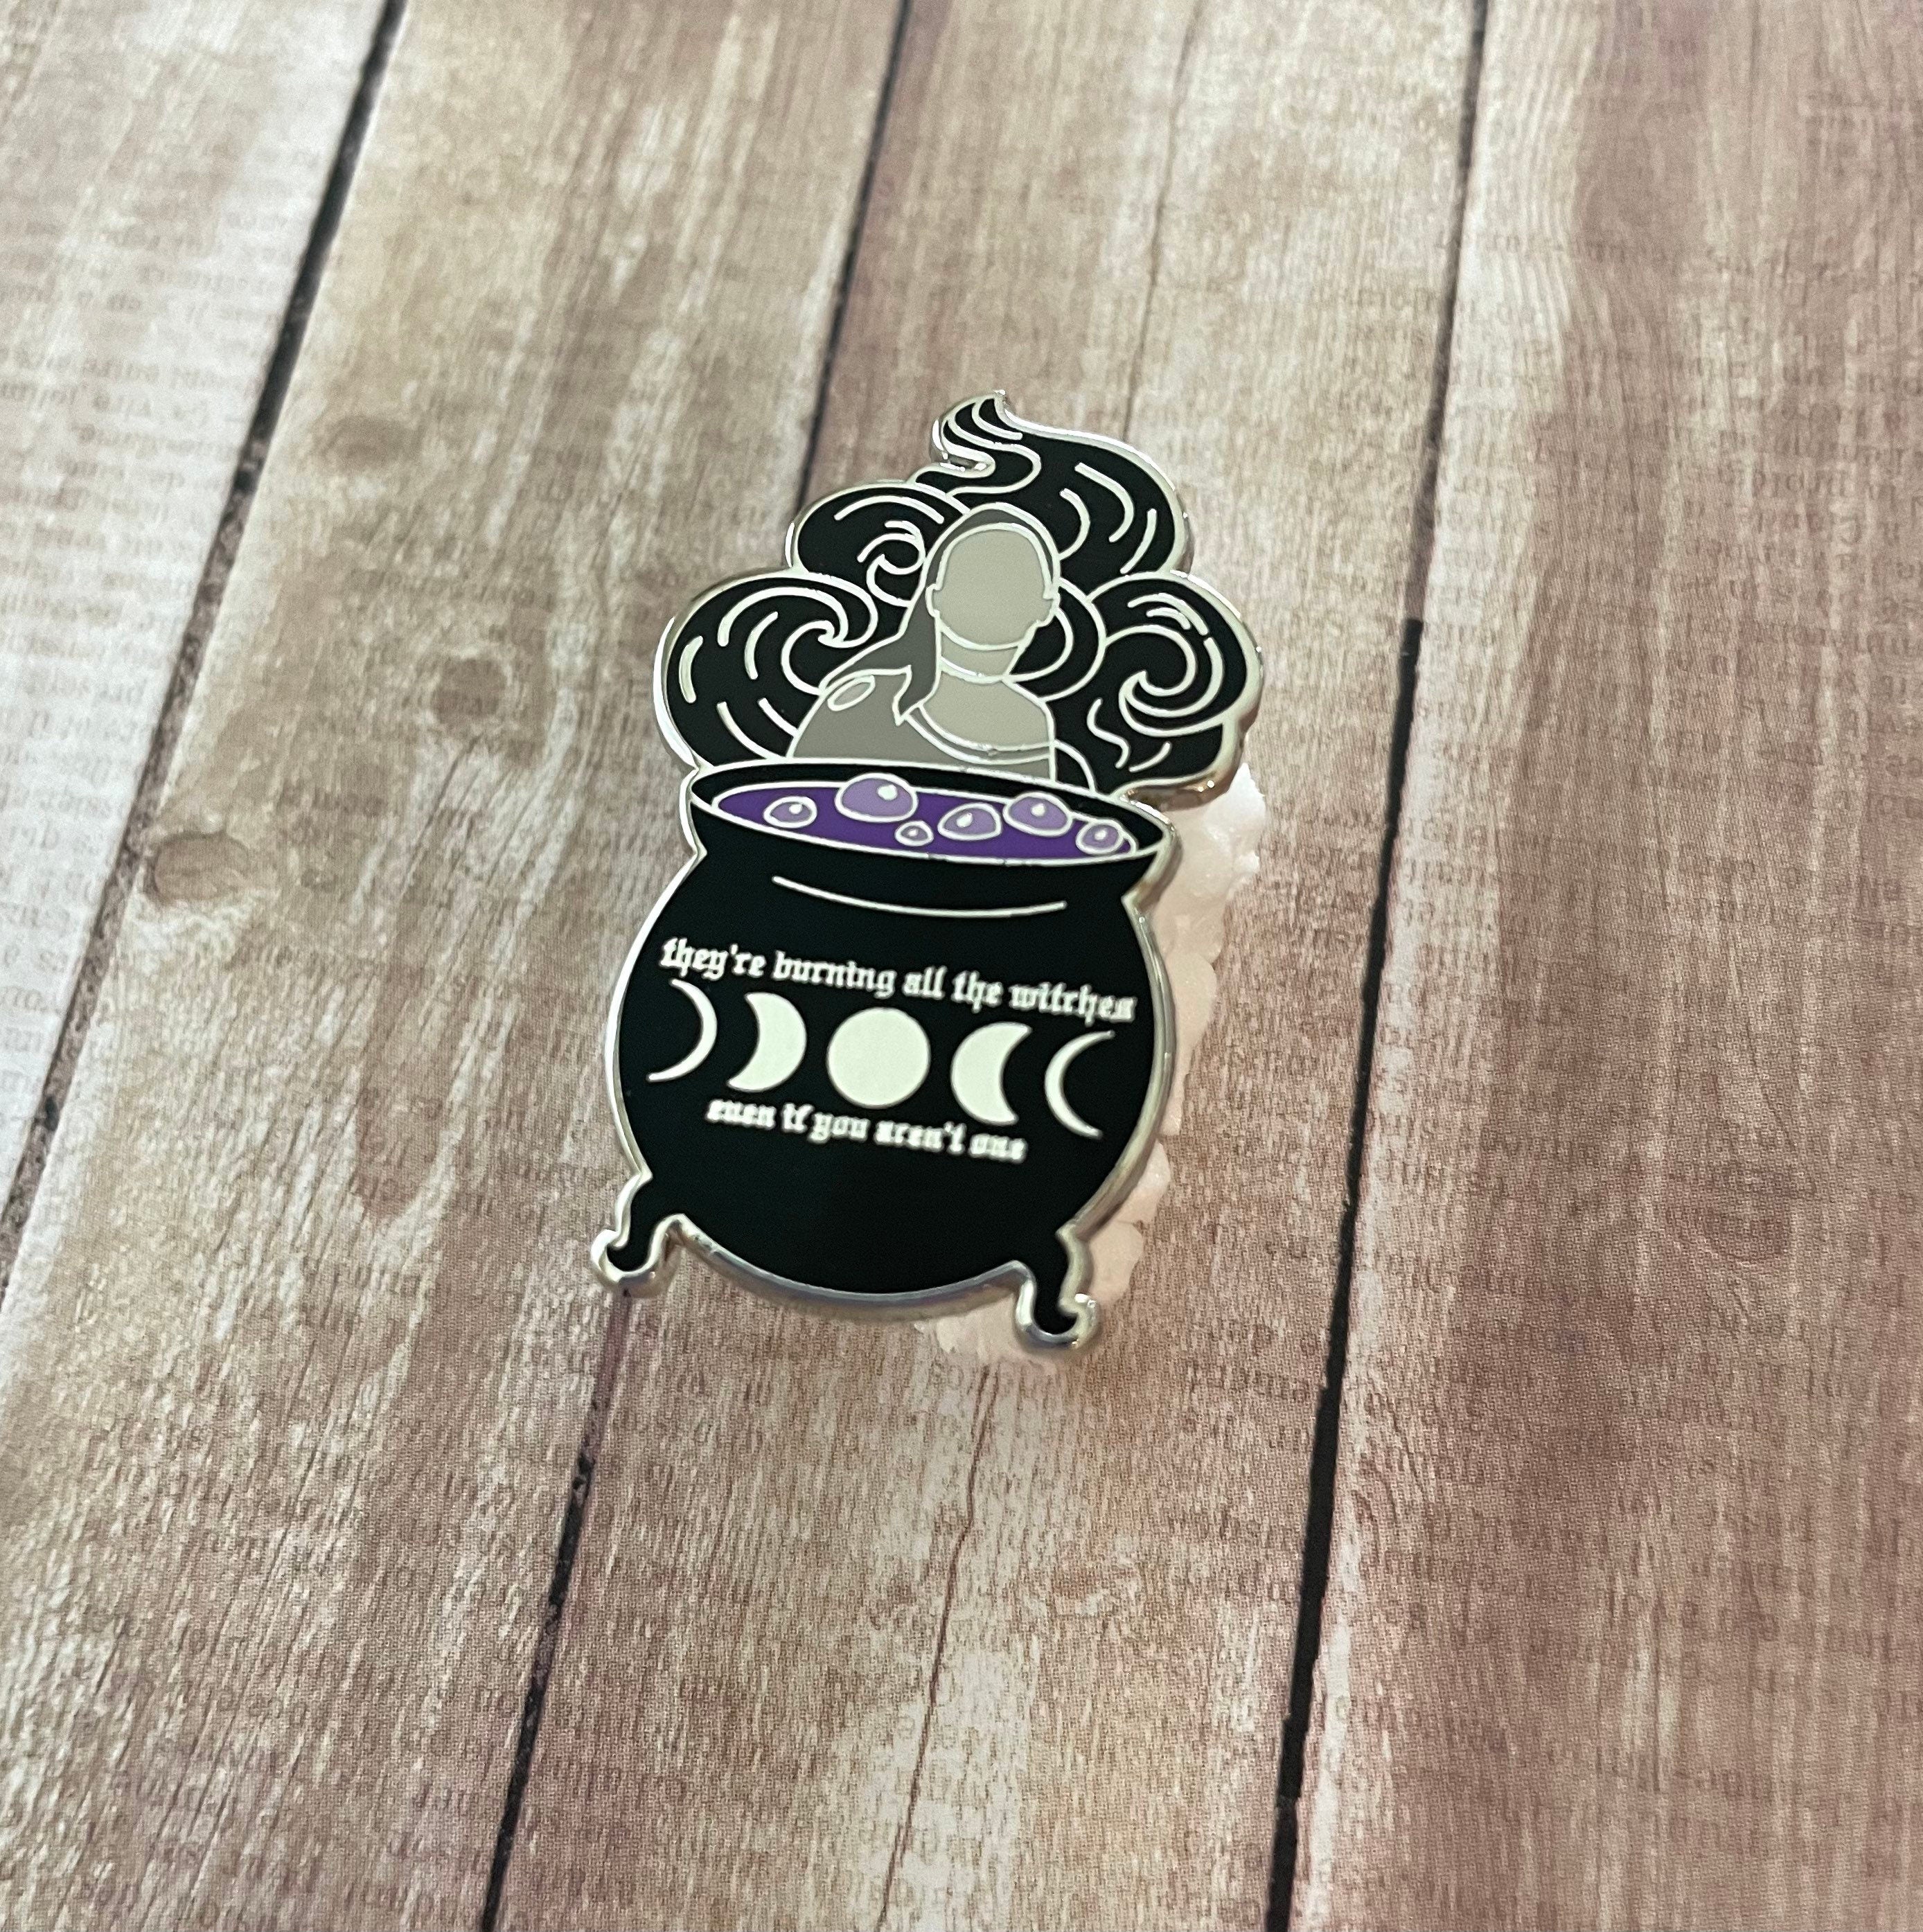 Taylor Swift Pin - Reputation Pin - Look What You Made Me Do Pin